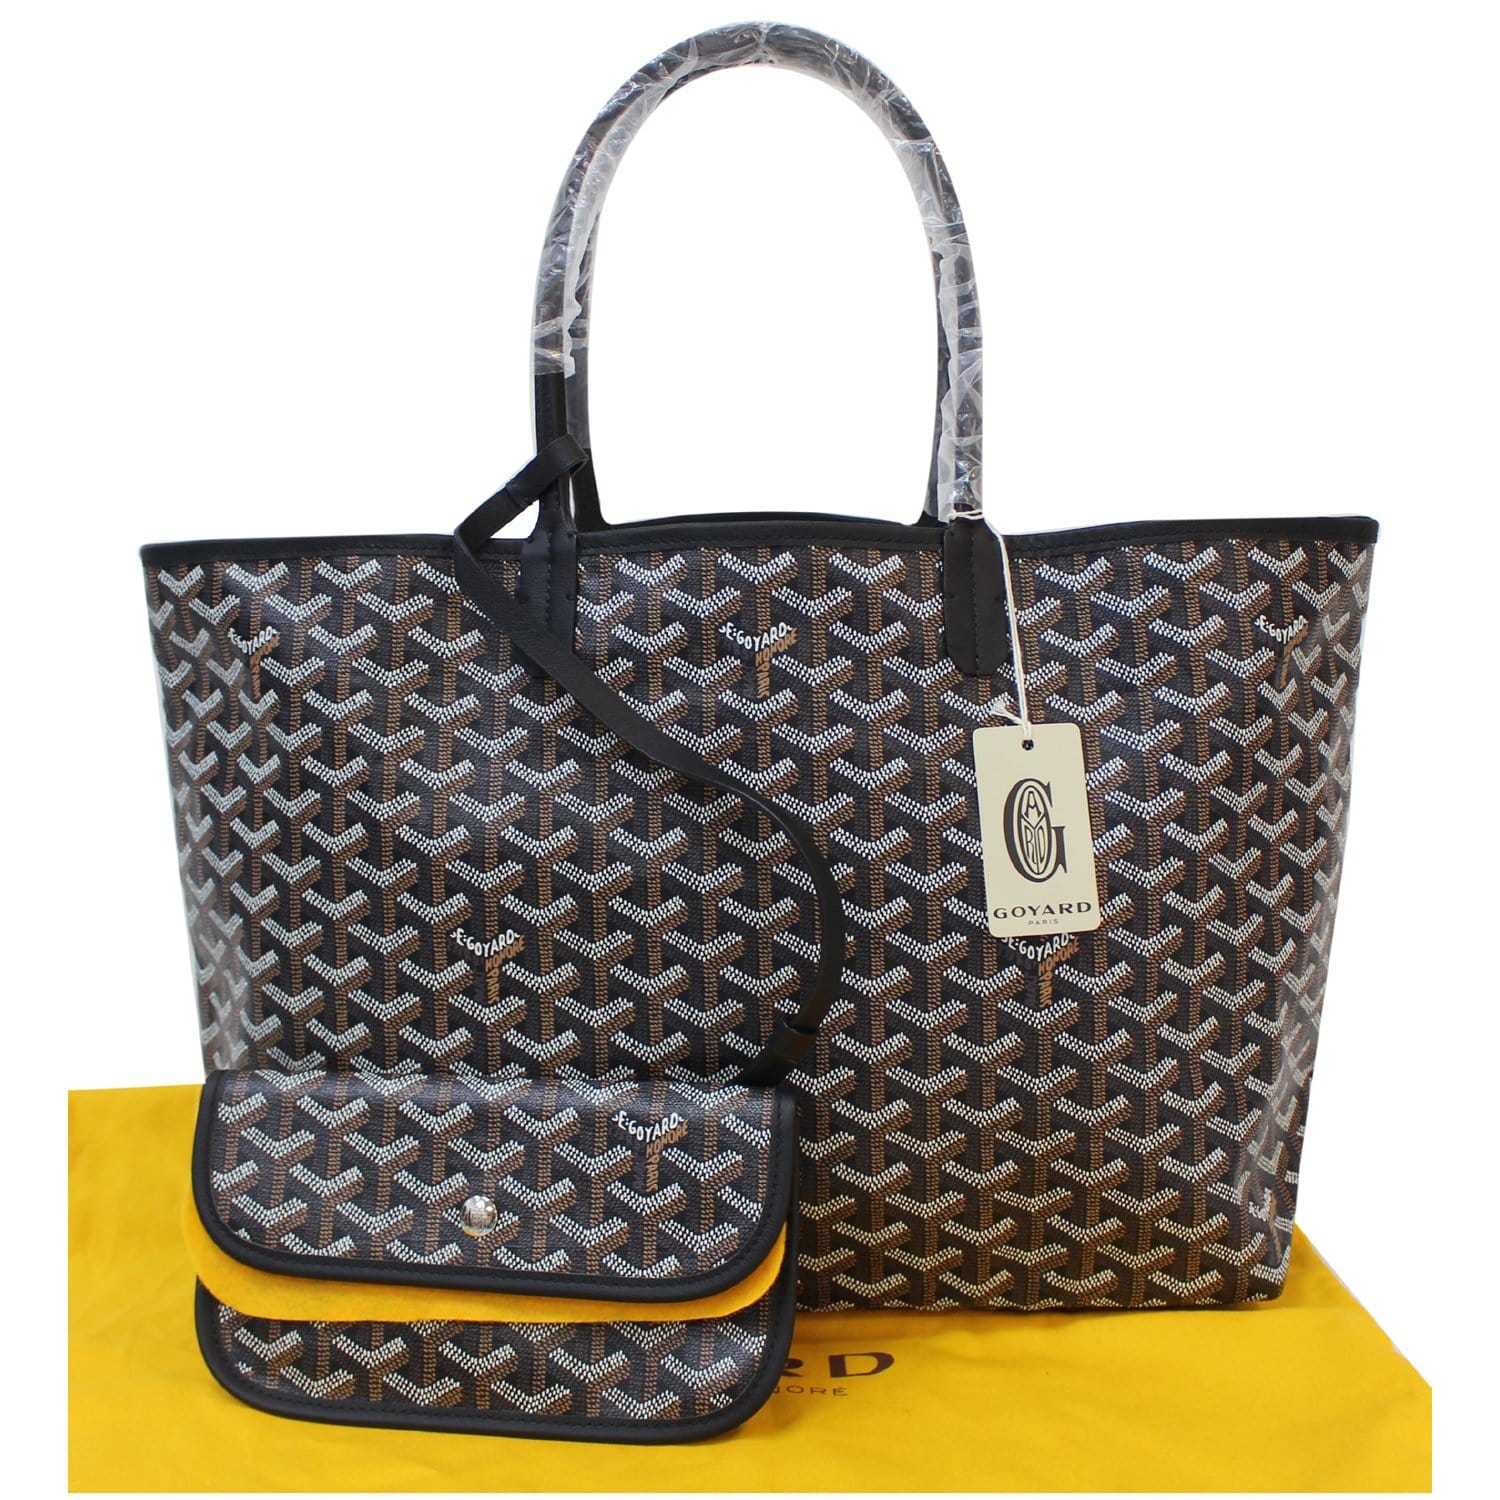 Goyard Saint-Louis PM Tote Bag with Pouch Leather White Preowned Good